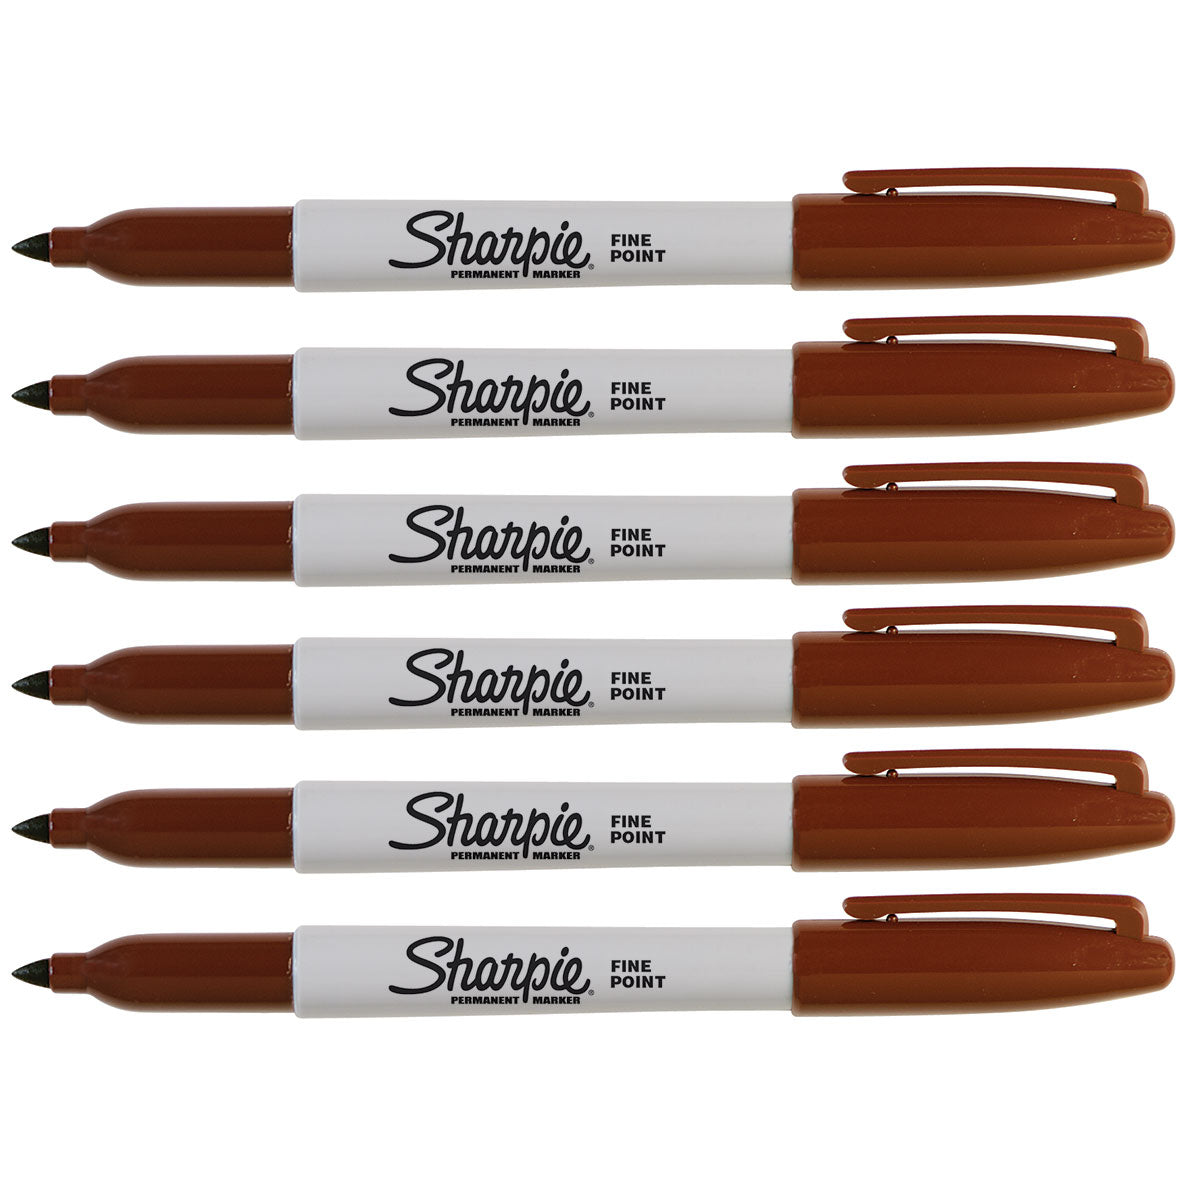 Sharpie Brown Markers, Fine Point, Pack of 6Pens and Pencils